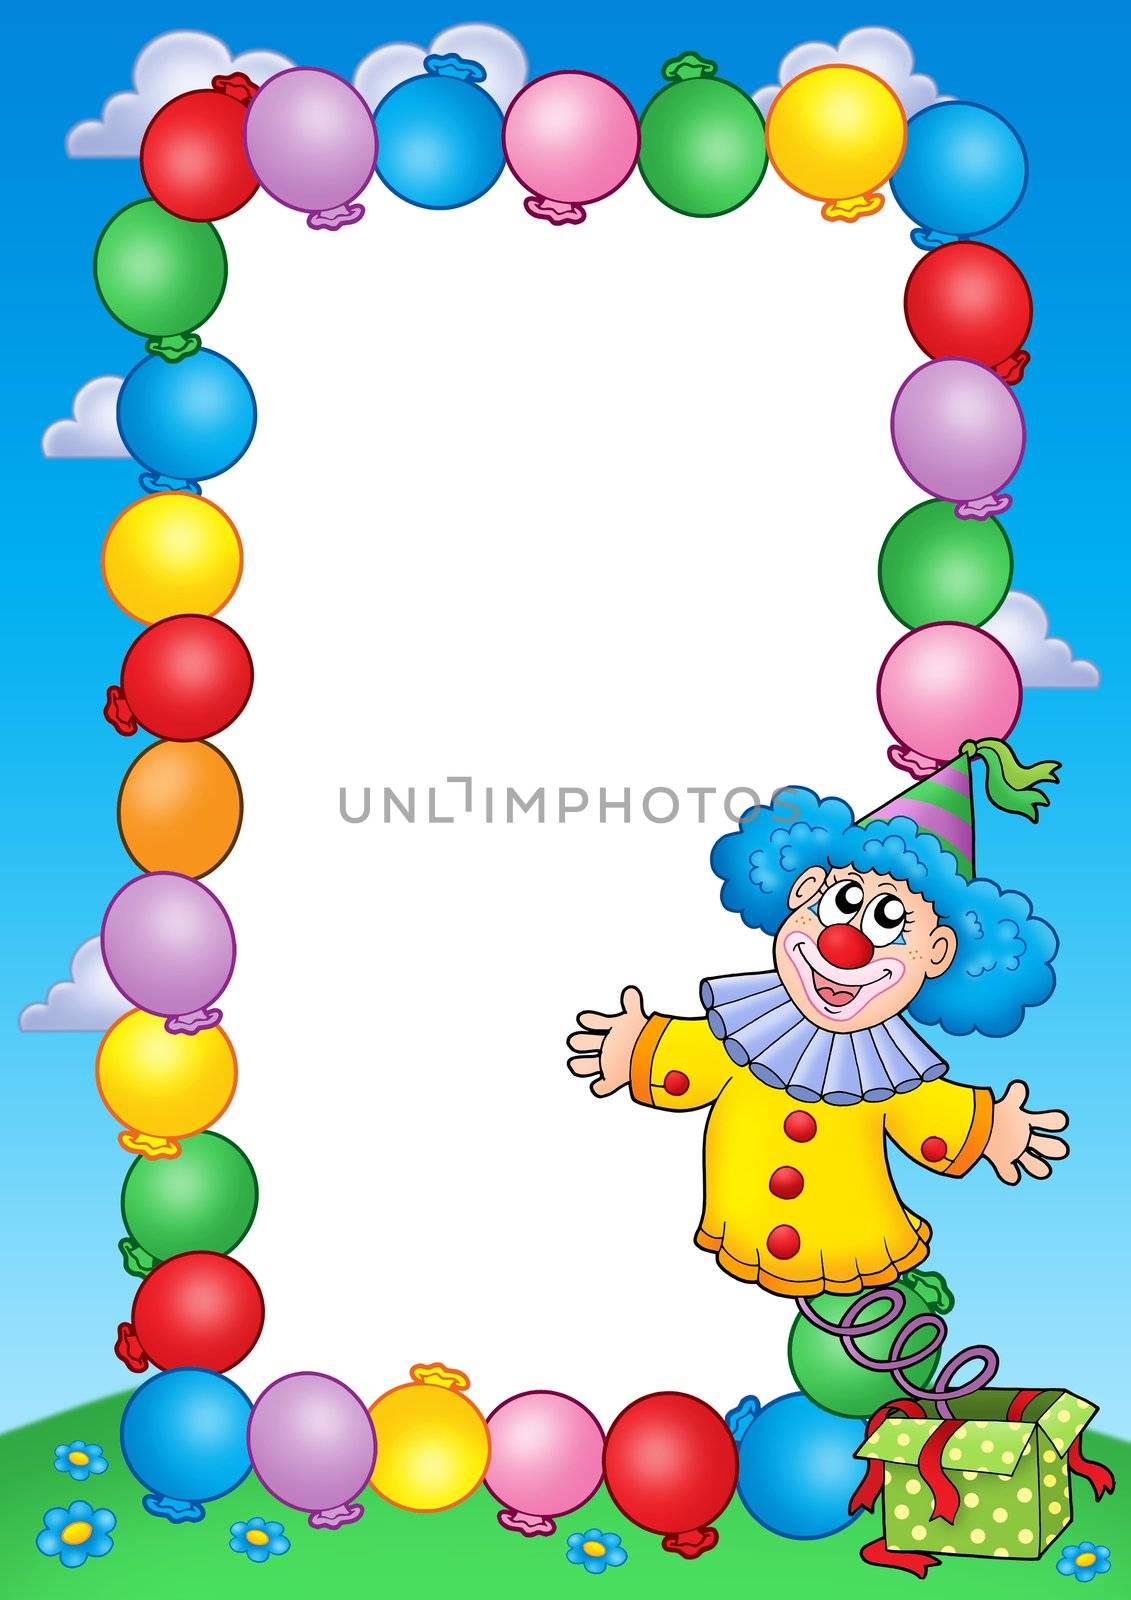 Party invitation frame with clown 3 by clairev